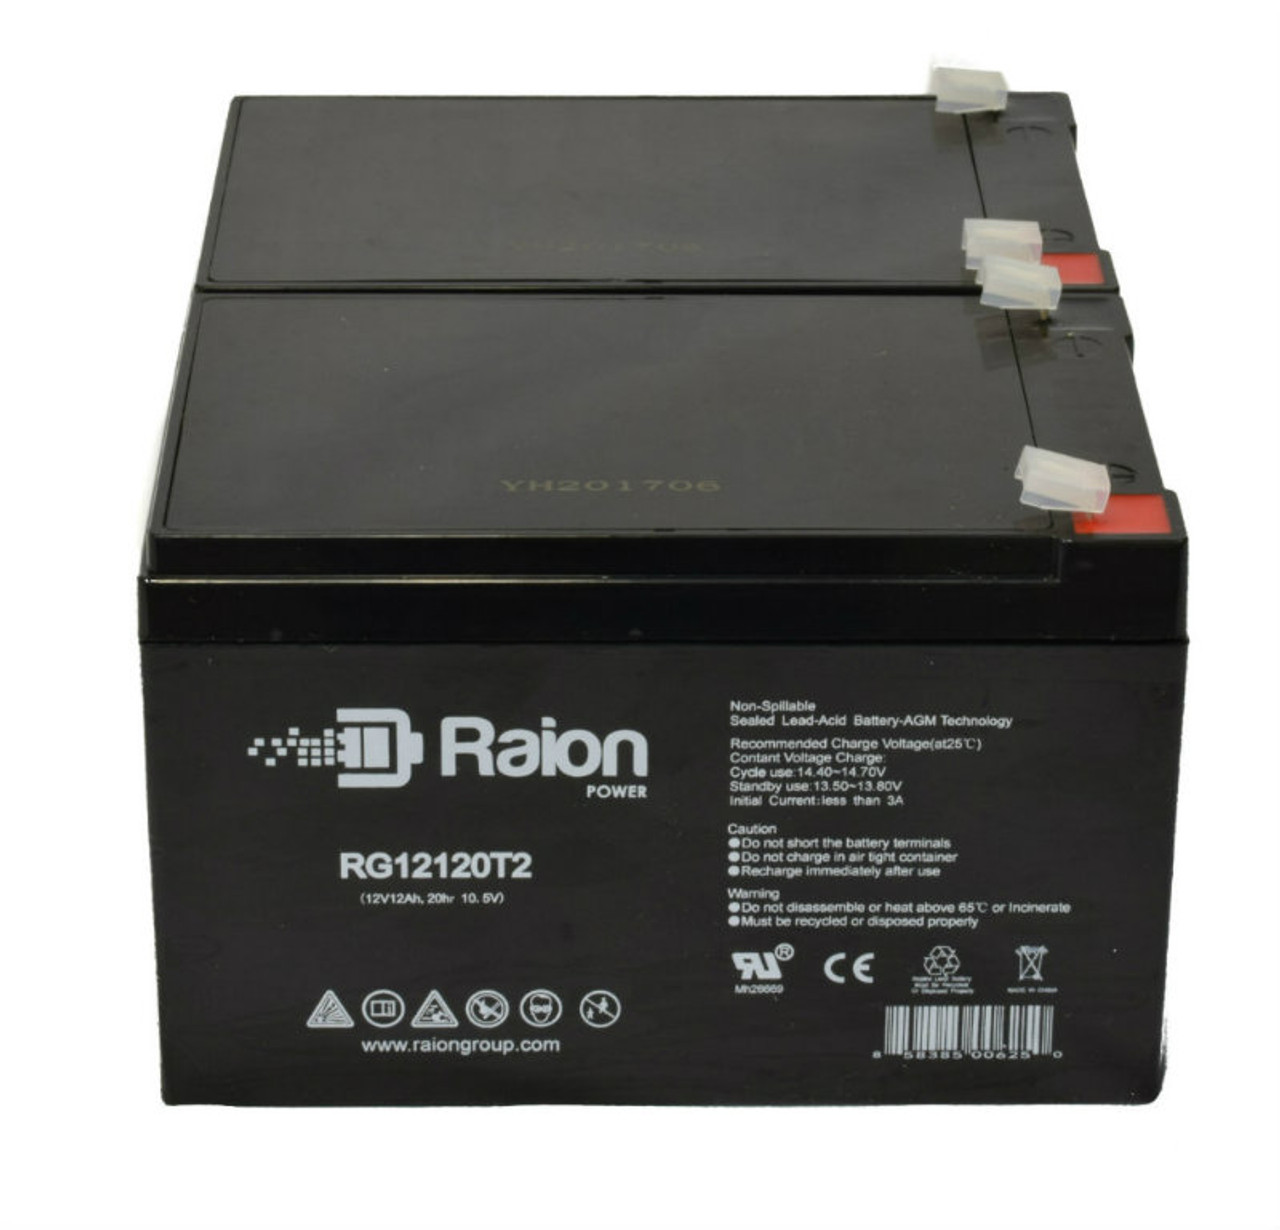 Raion Power 12V 12Ah Replacement Alarm Security System Battery for Altronix AL602ULADAJ - 2 Pack